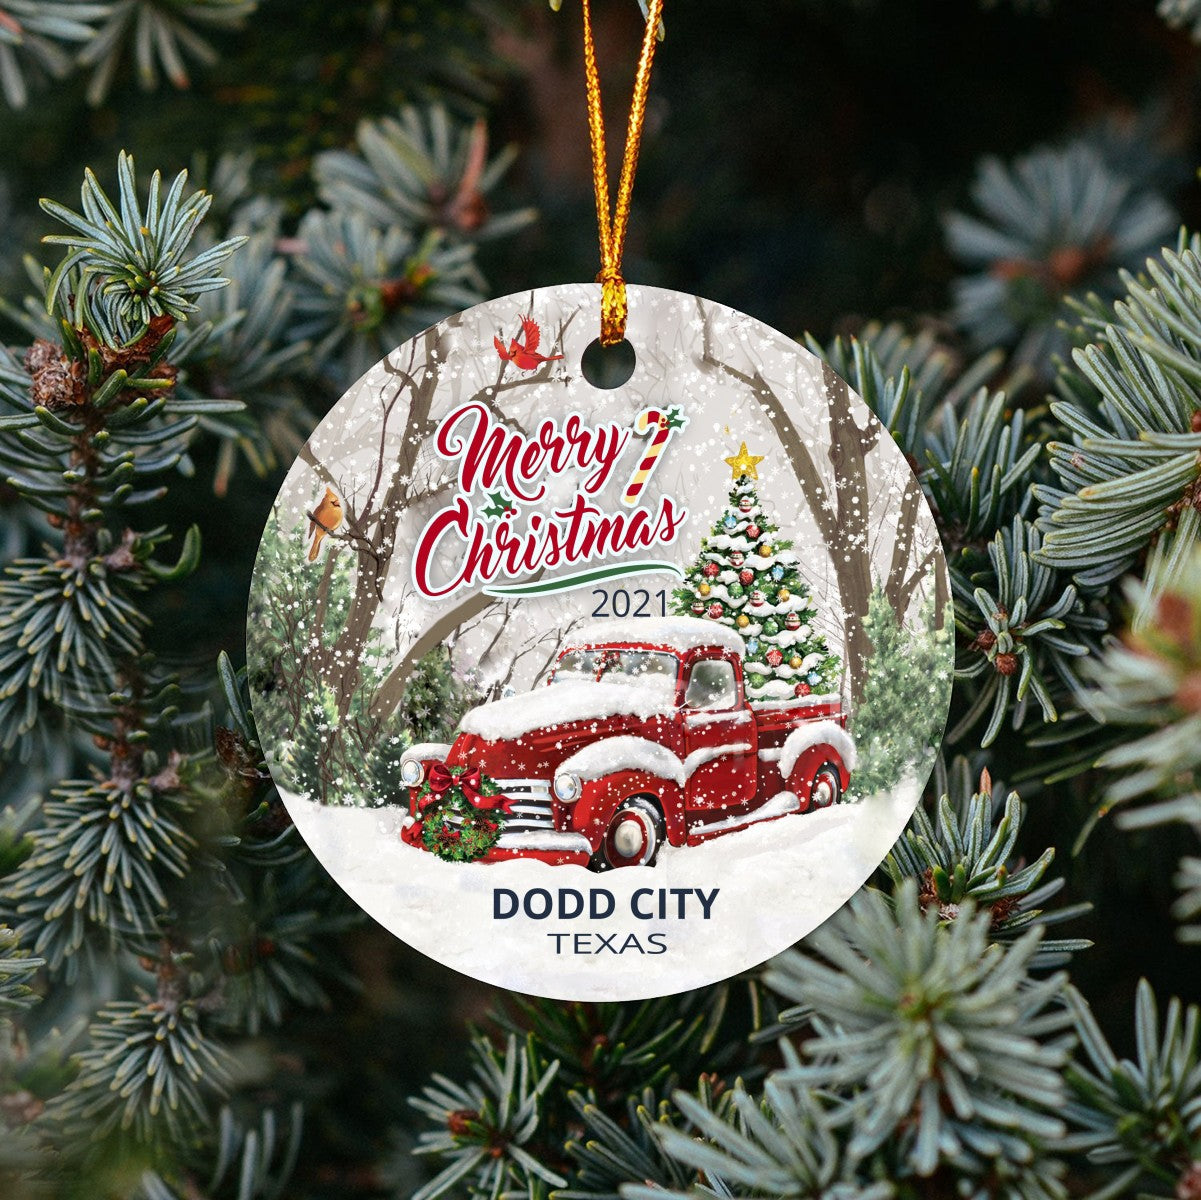 Christmas Tree Ornaments Dodd City - Ornament With Name City, State Dodd City Texas TX Ornament - Red Truck Xmas Ornaments 3'' Plastic Gift For Family, Friend And Housewarming